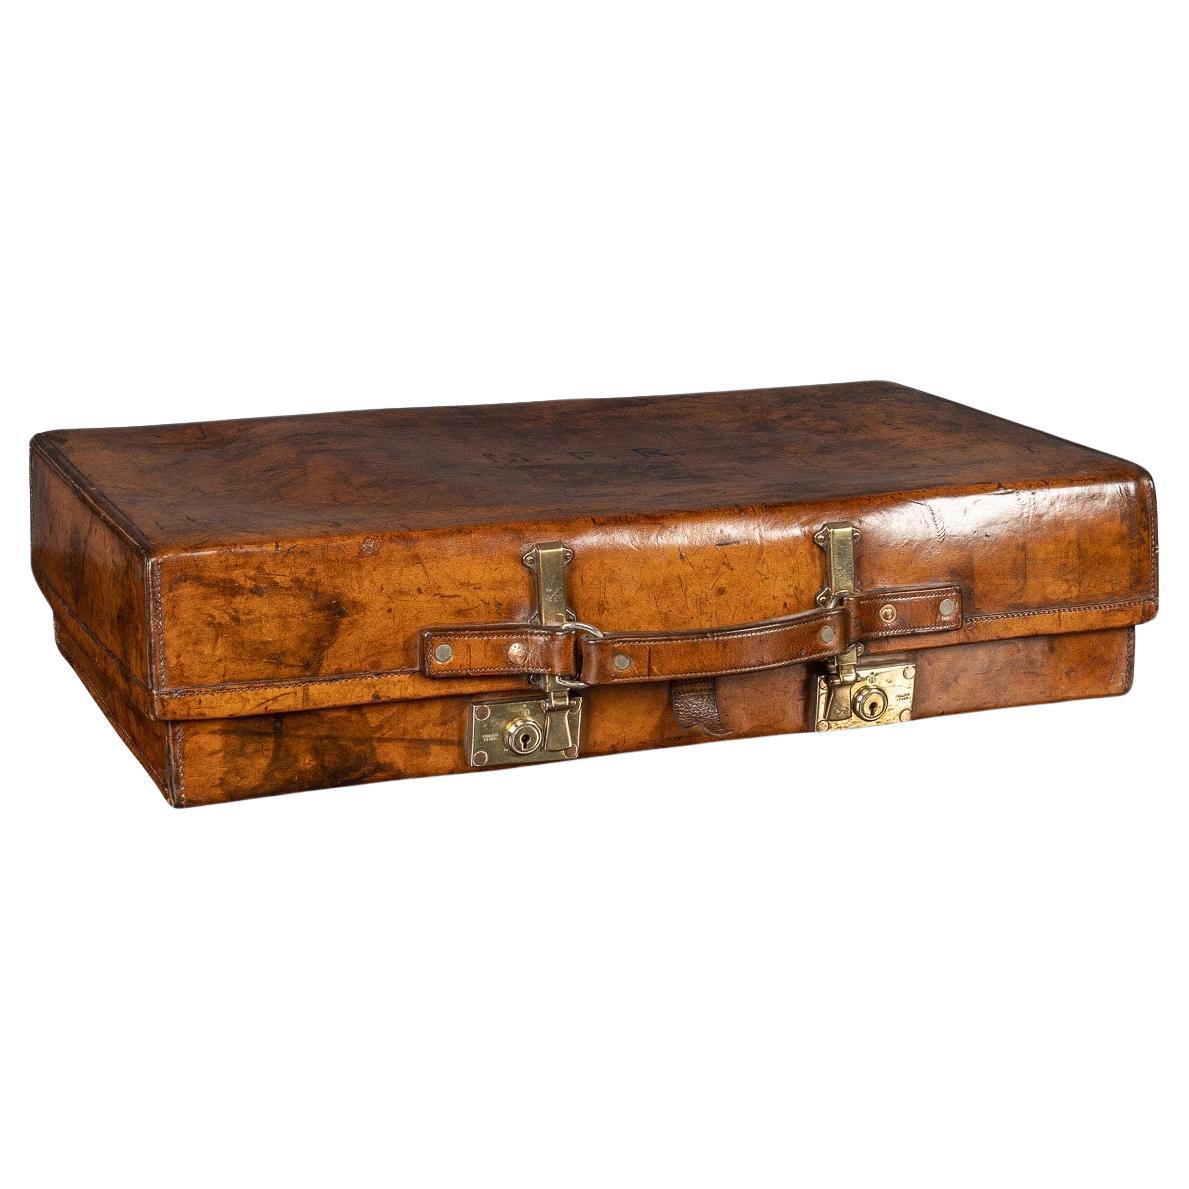 20th Century Revelation Expanding Leather Suitcase, c.1920 For Sale